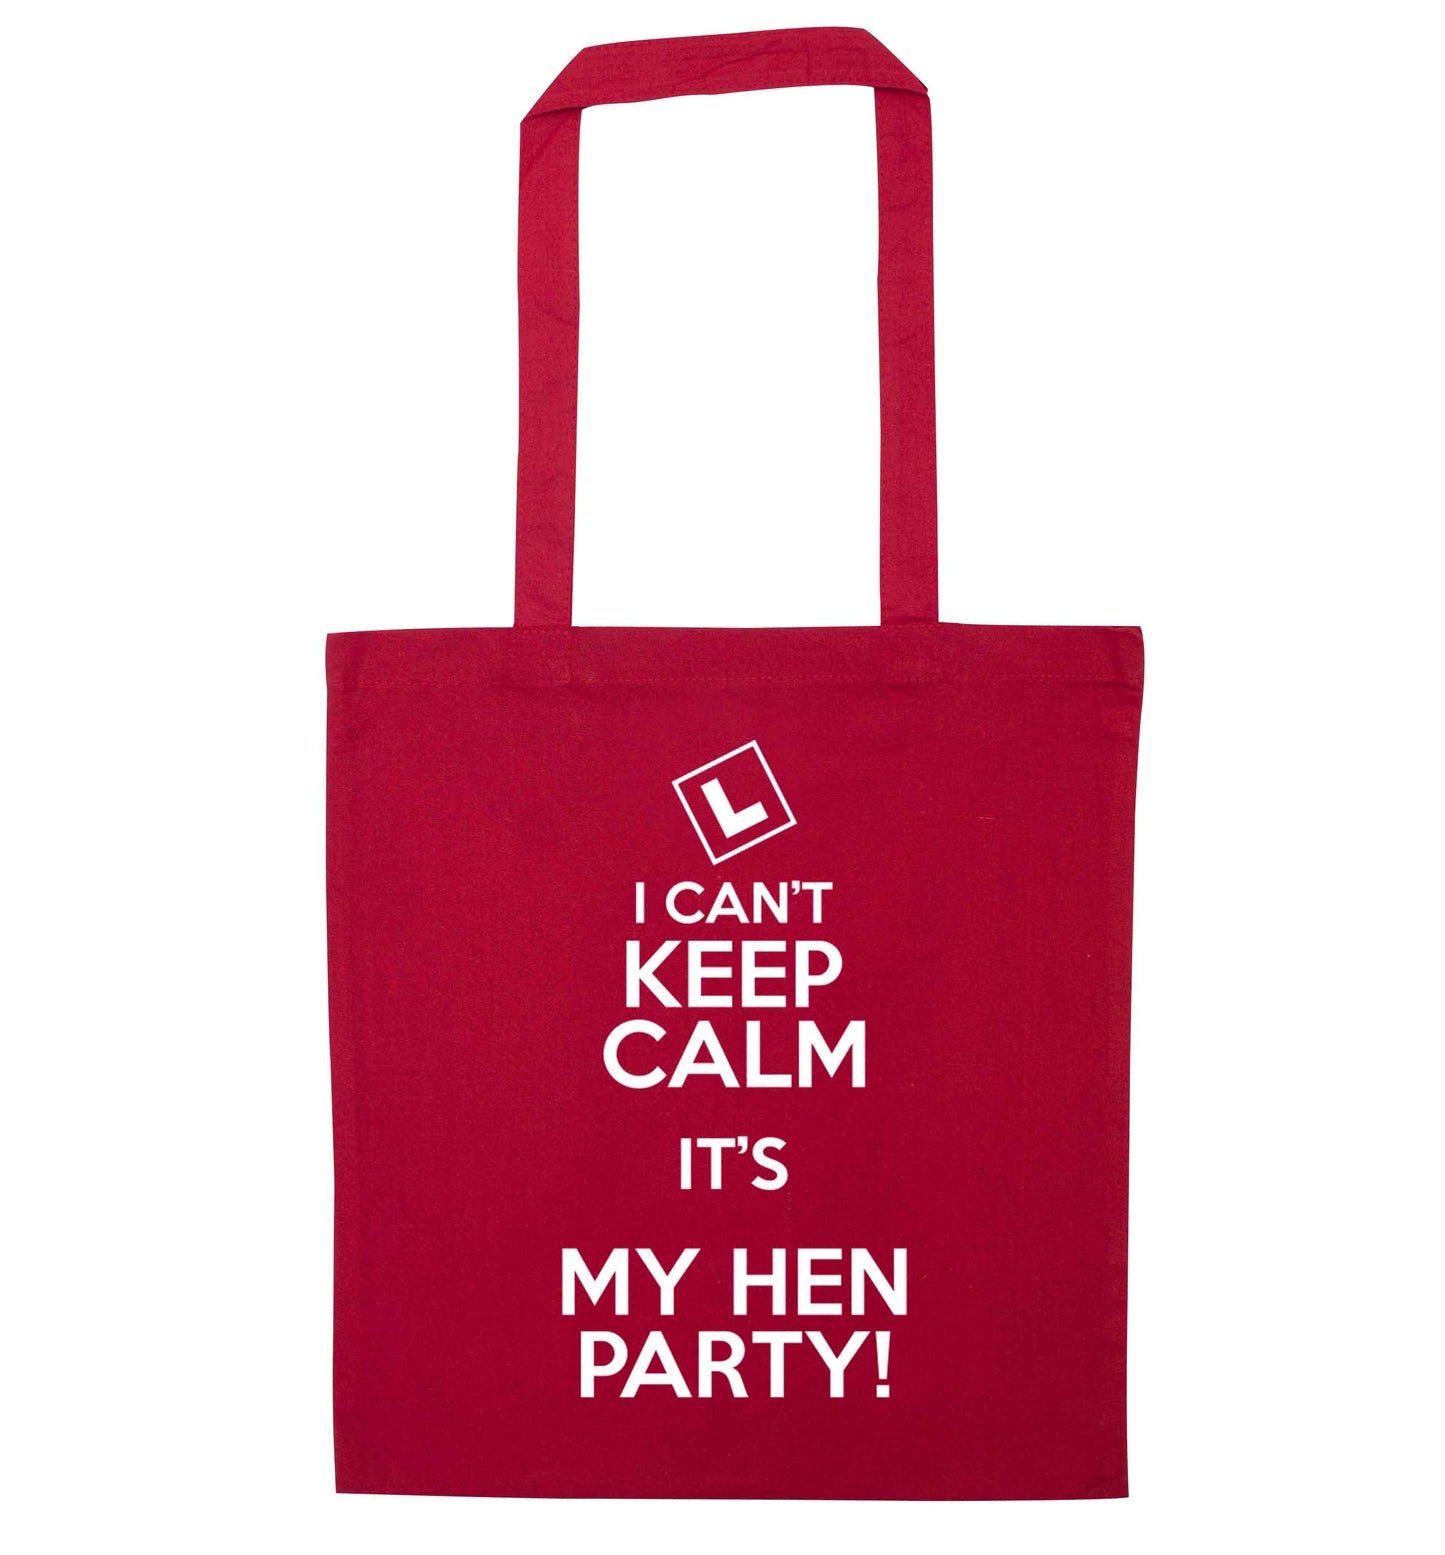 I can't keep calm it's my hen party red tote bag